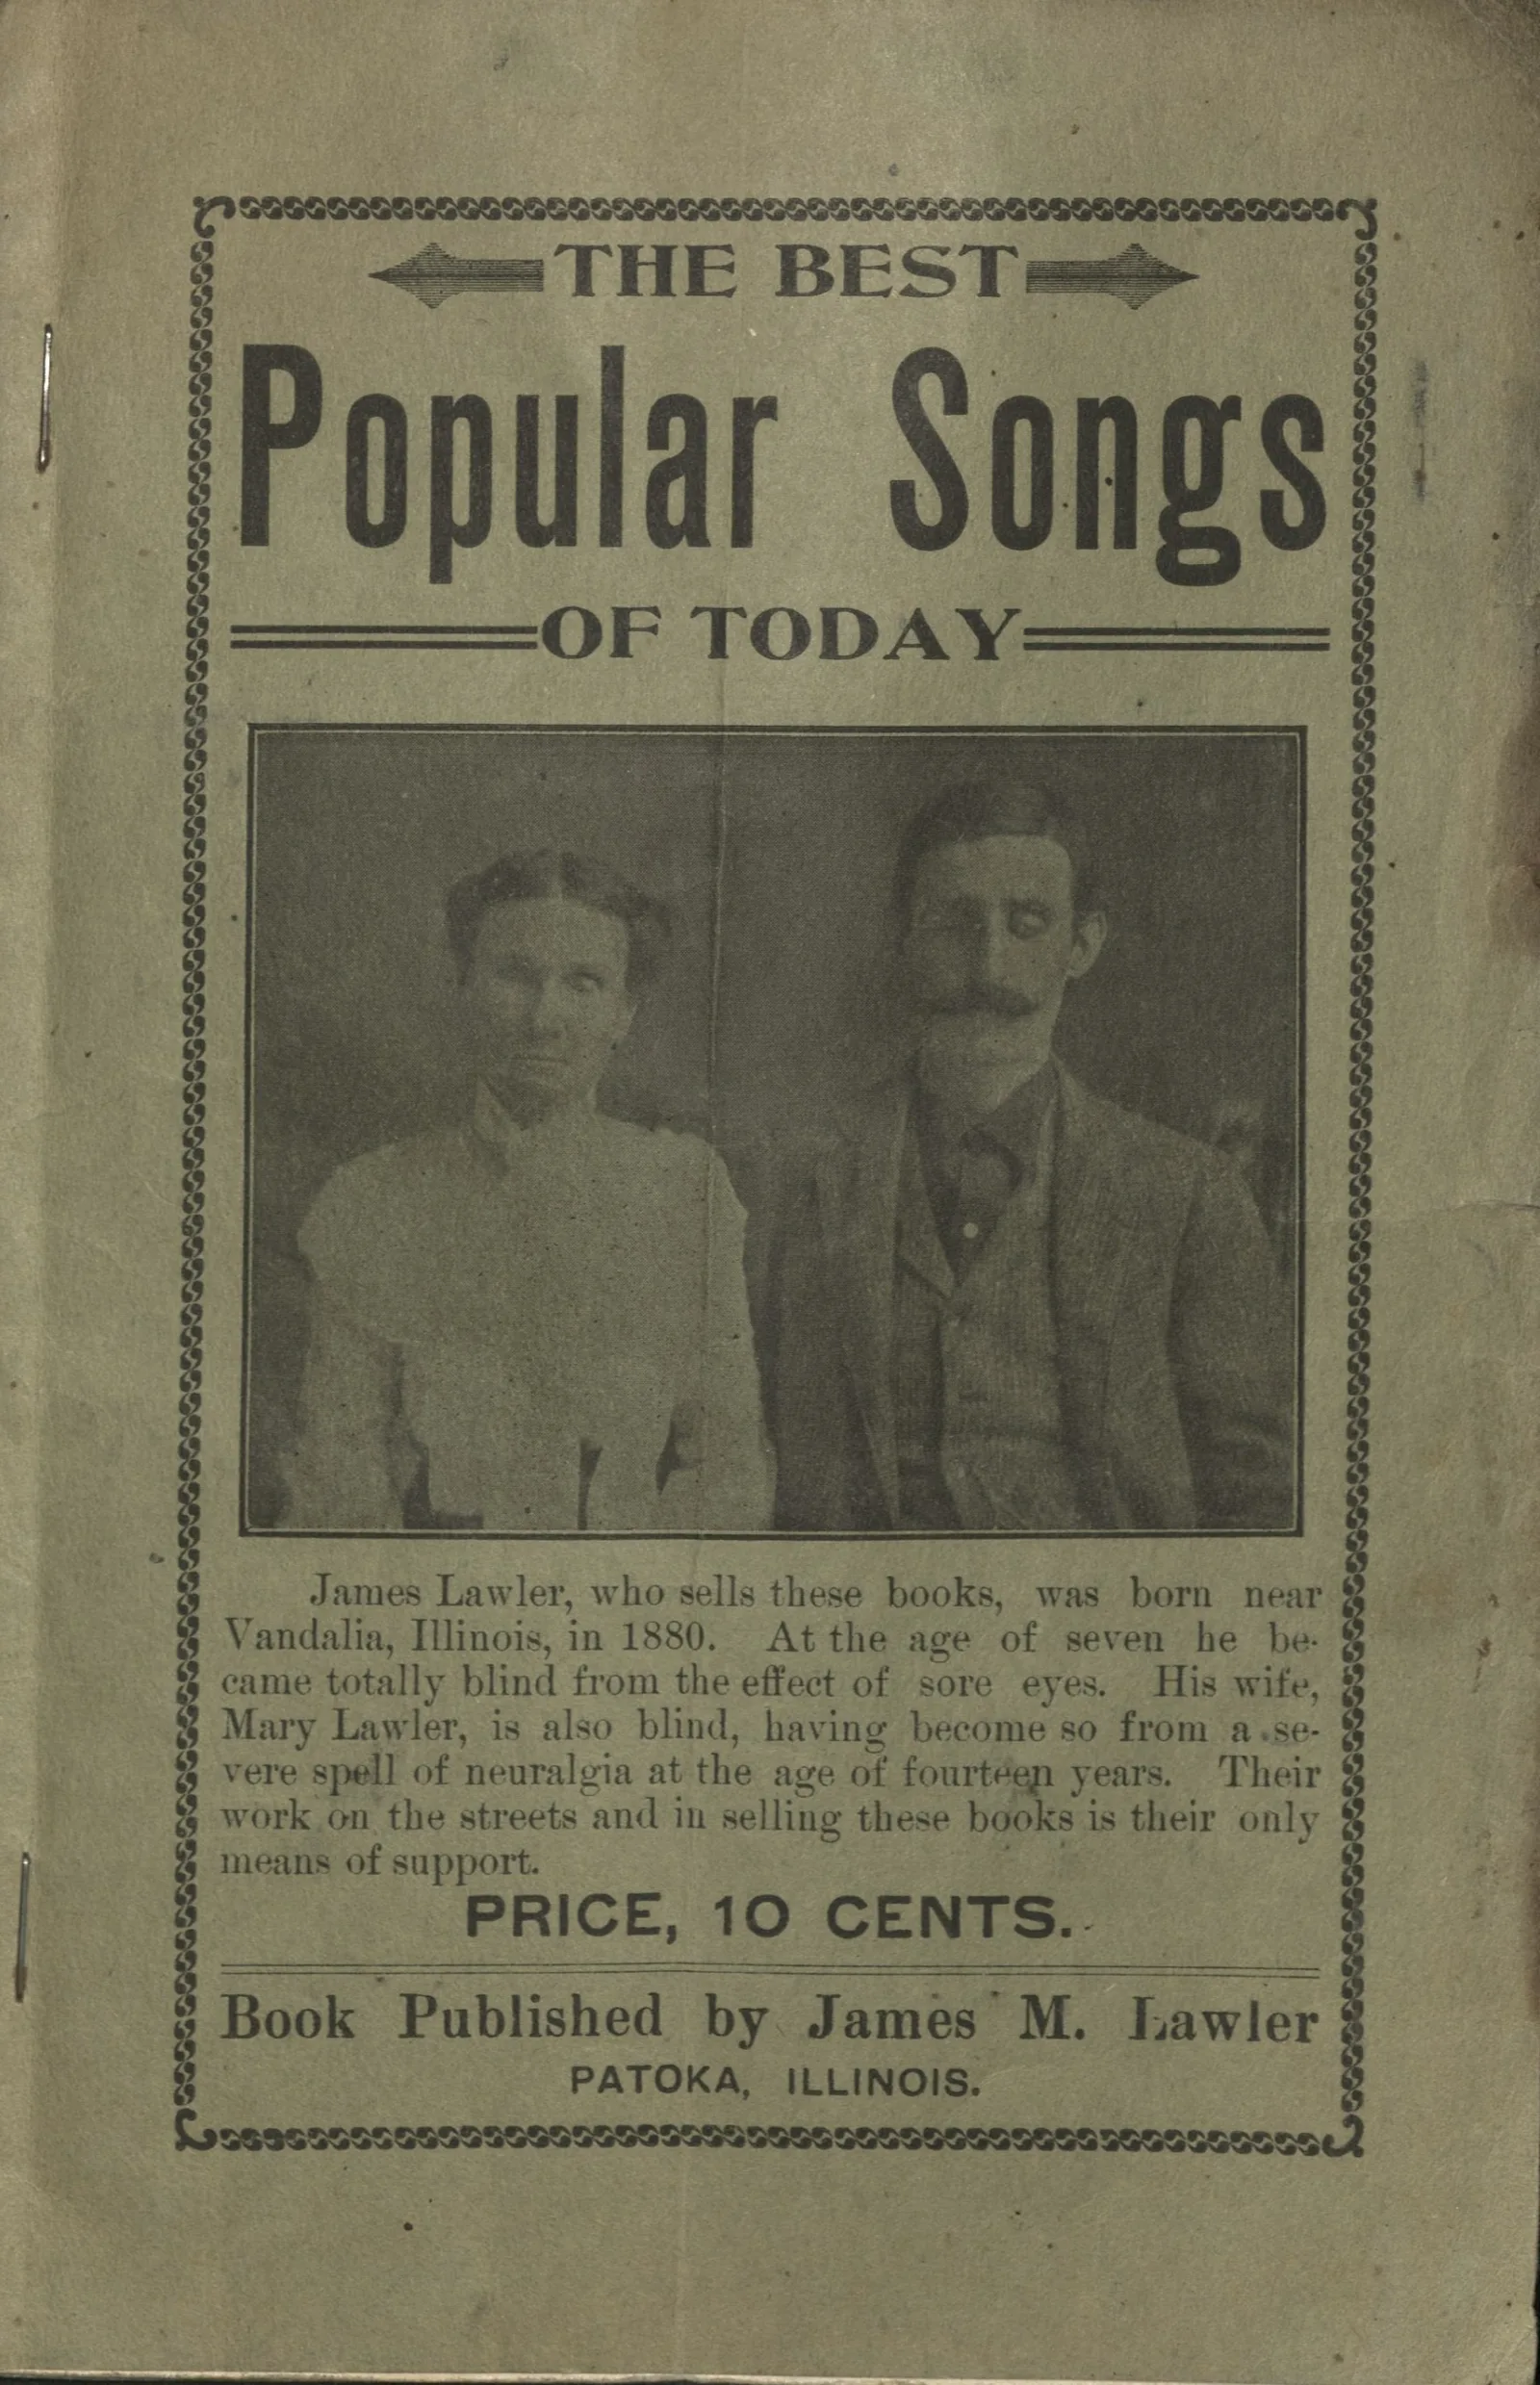 Below the title "The Best Popular Songs of Today" is a photo of James and Mary Lawler.